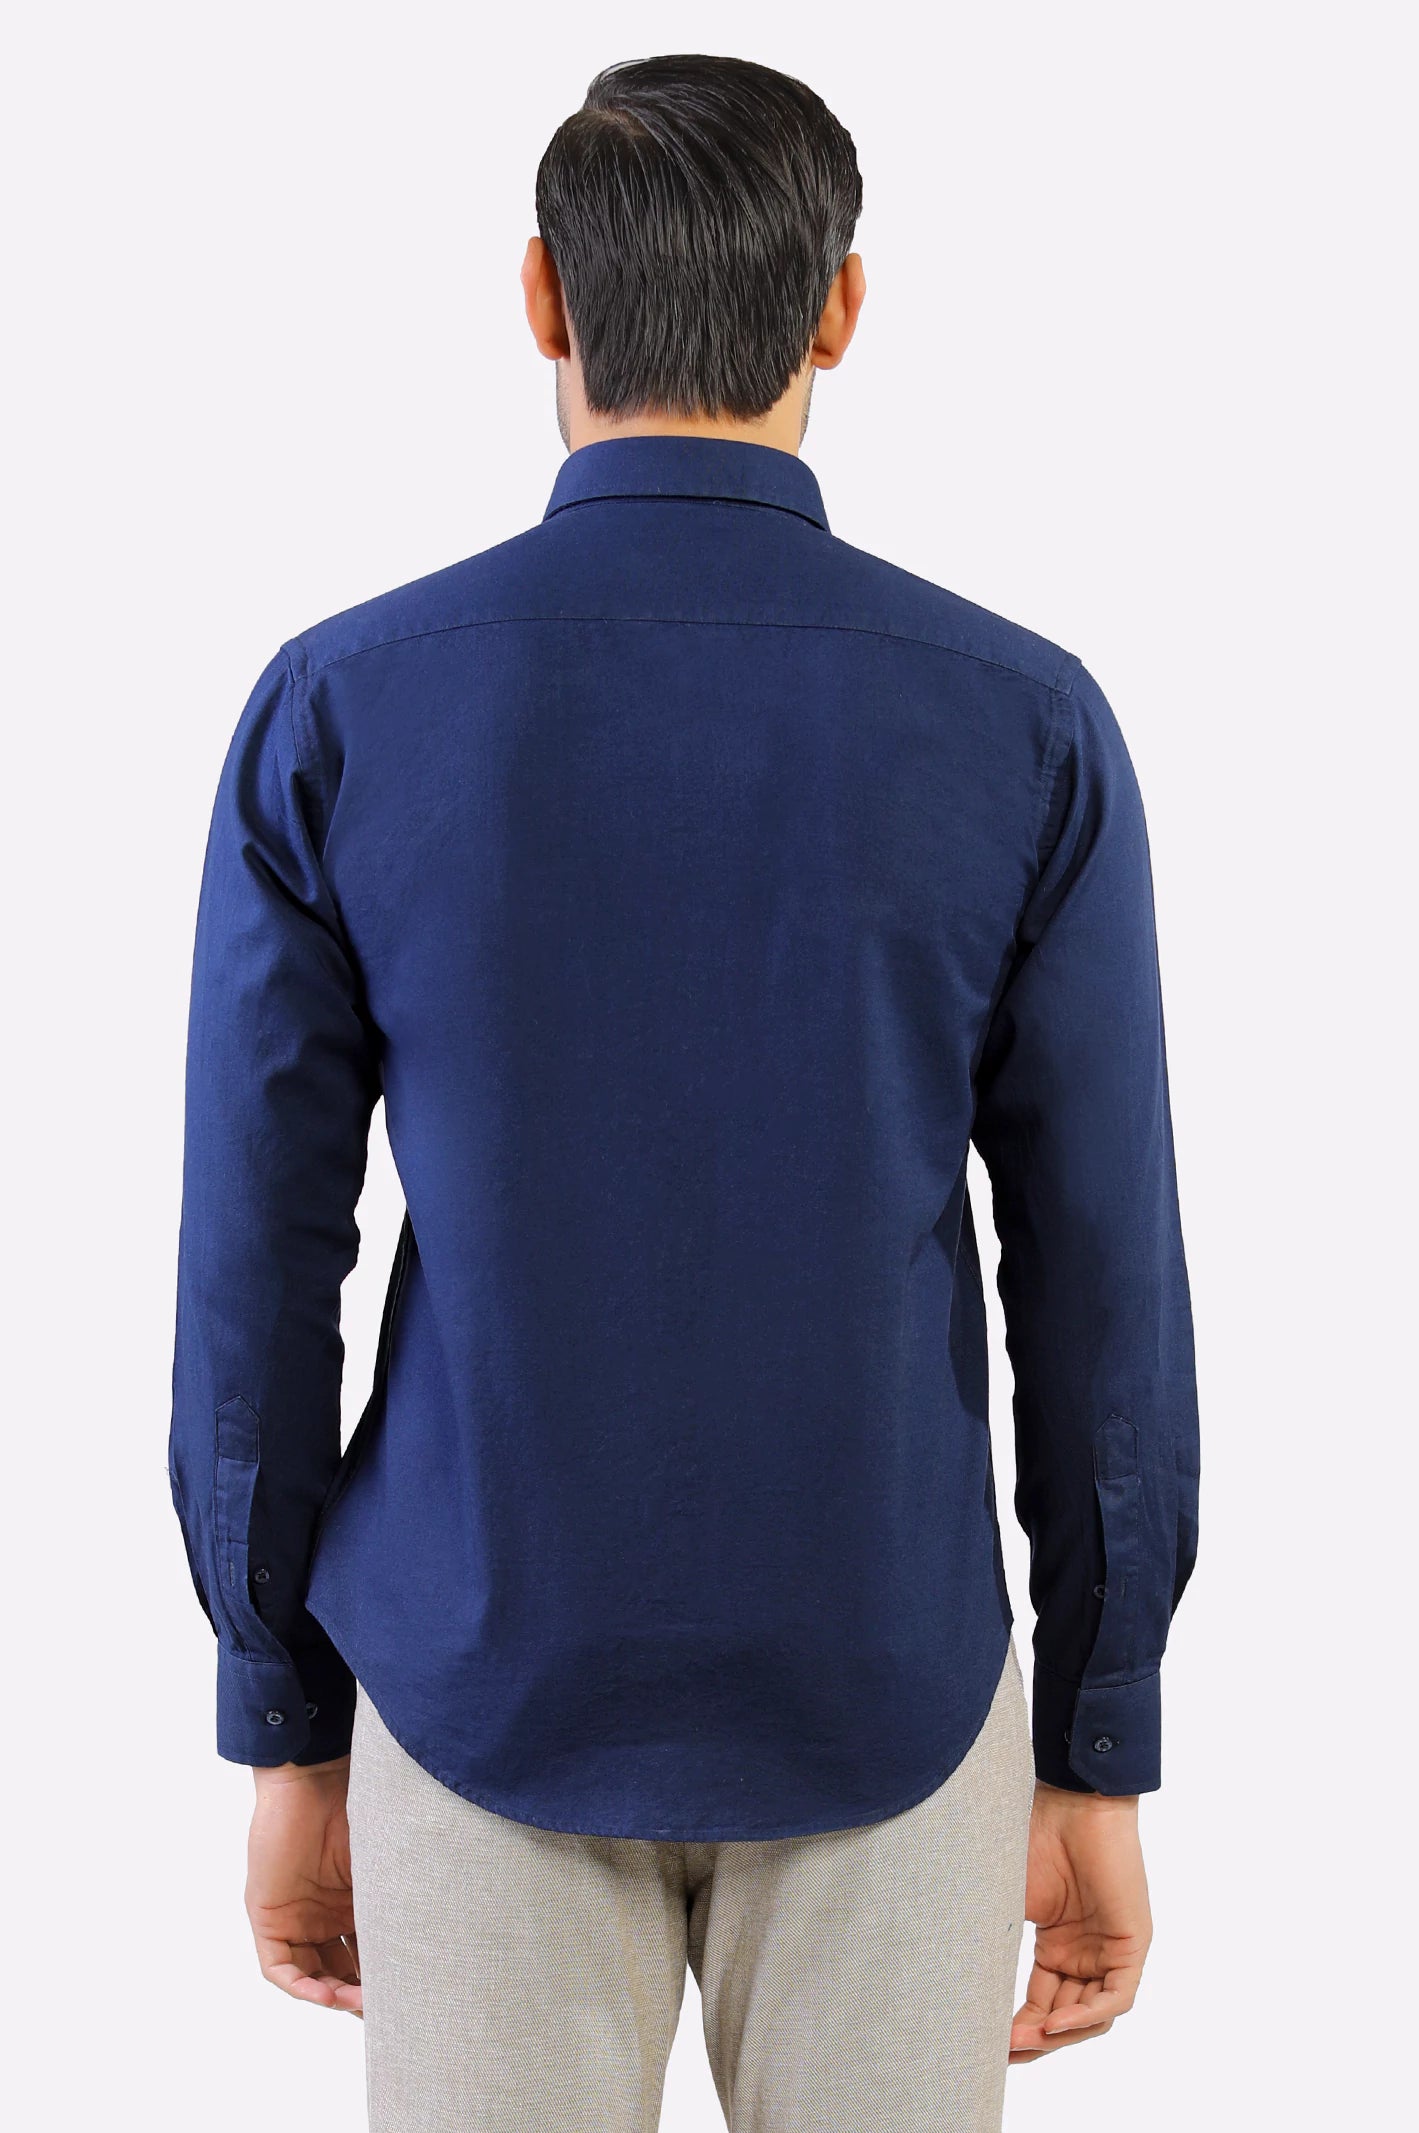 Diners Navy Blue Plain Casual Shirt for Sale